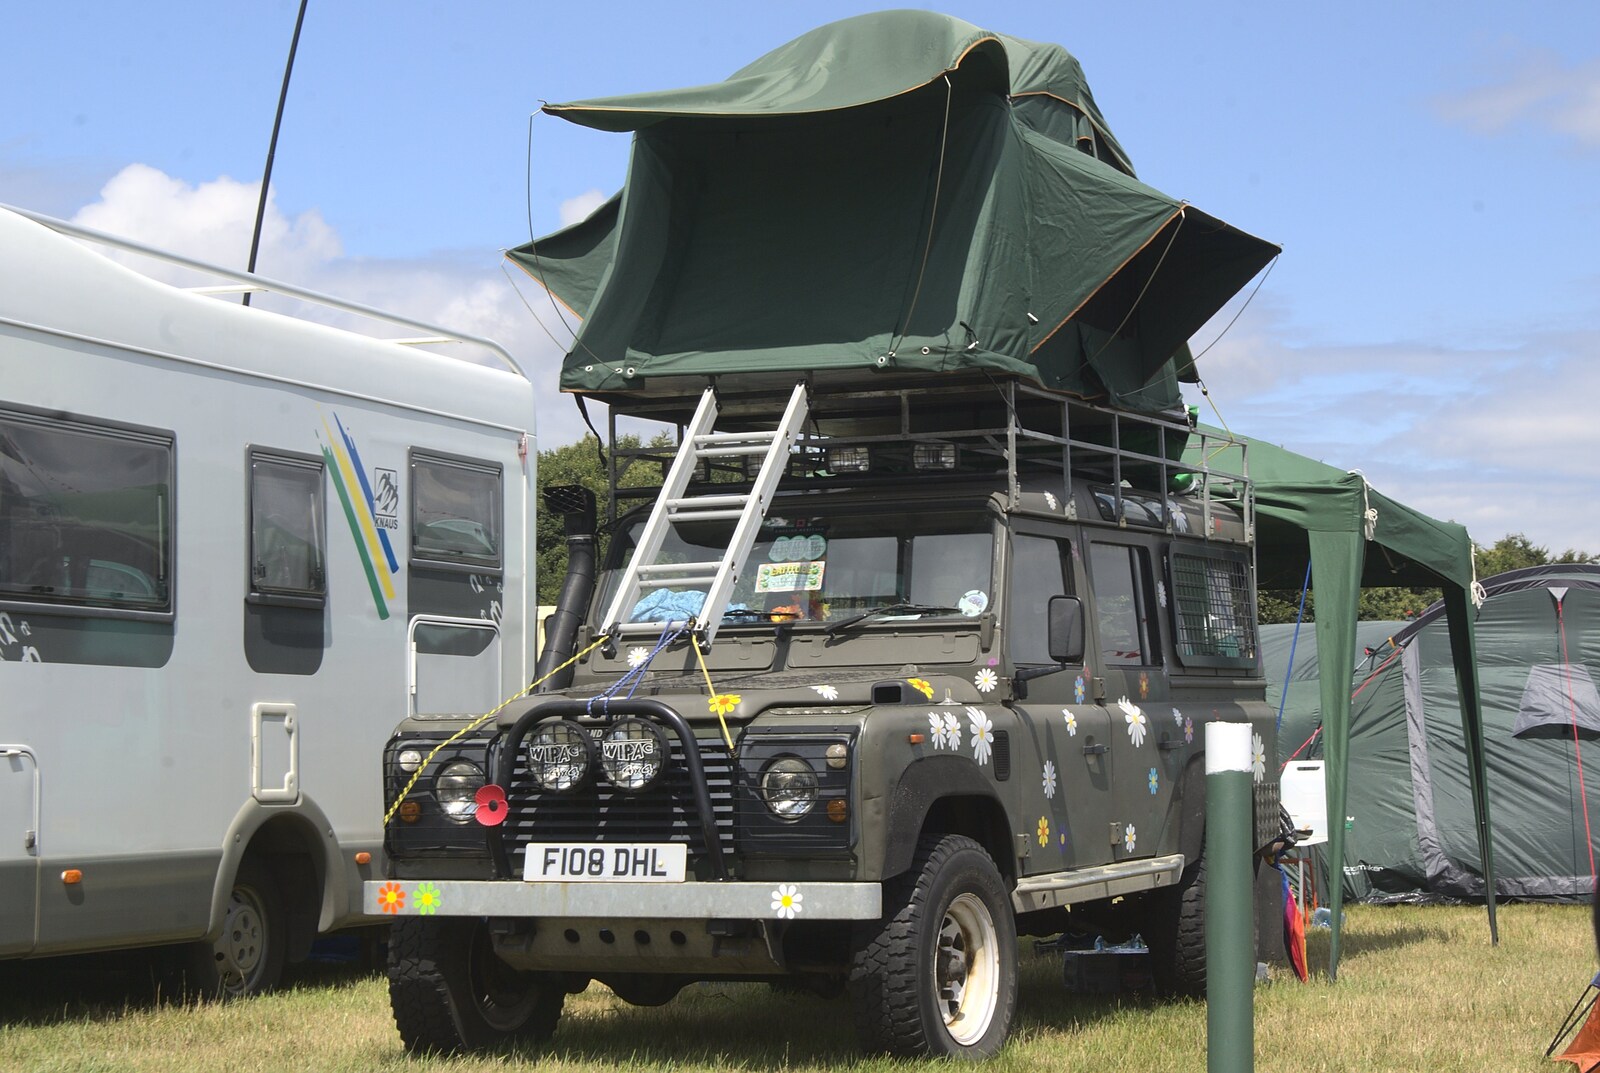 A tent on a Land Rover from The Latitude Festival, Henham Park, Suffolk - 20th July 2009